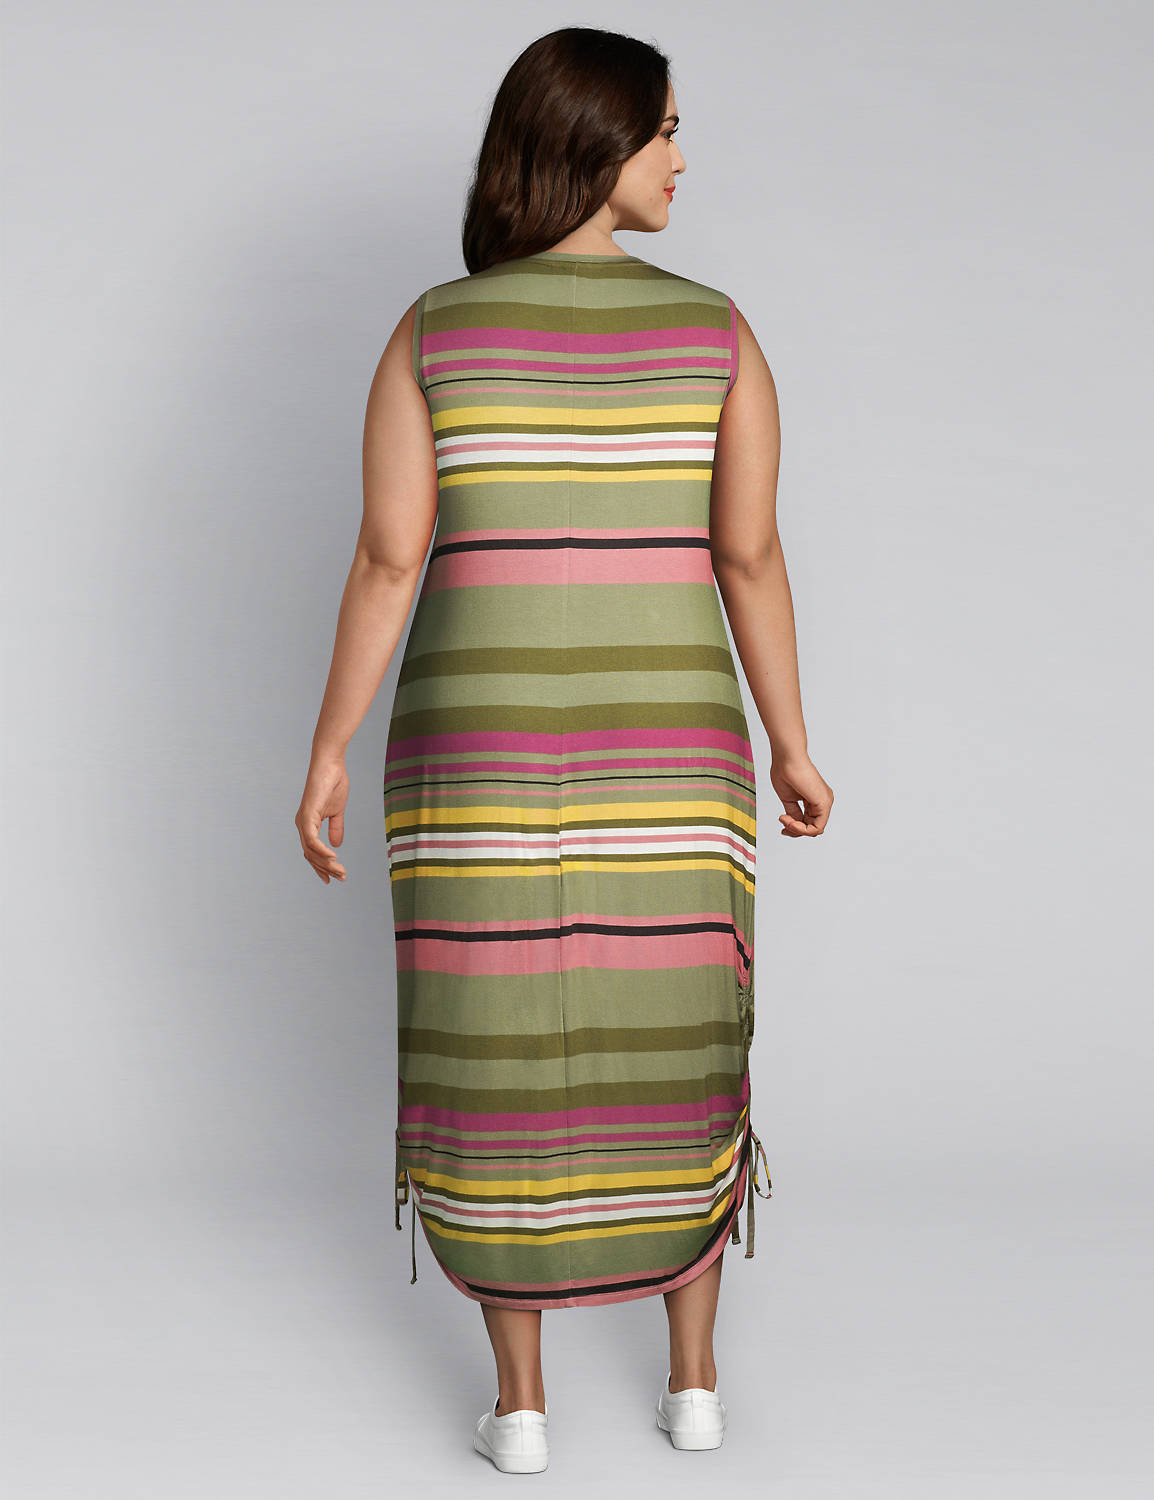 1114835 Sleeveless Vneck Side Ruched Midi - 190:LBSU20249_MultiSalsaStripe_ccolorway6:10/12 Product Image 2